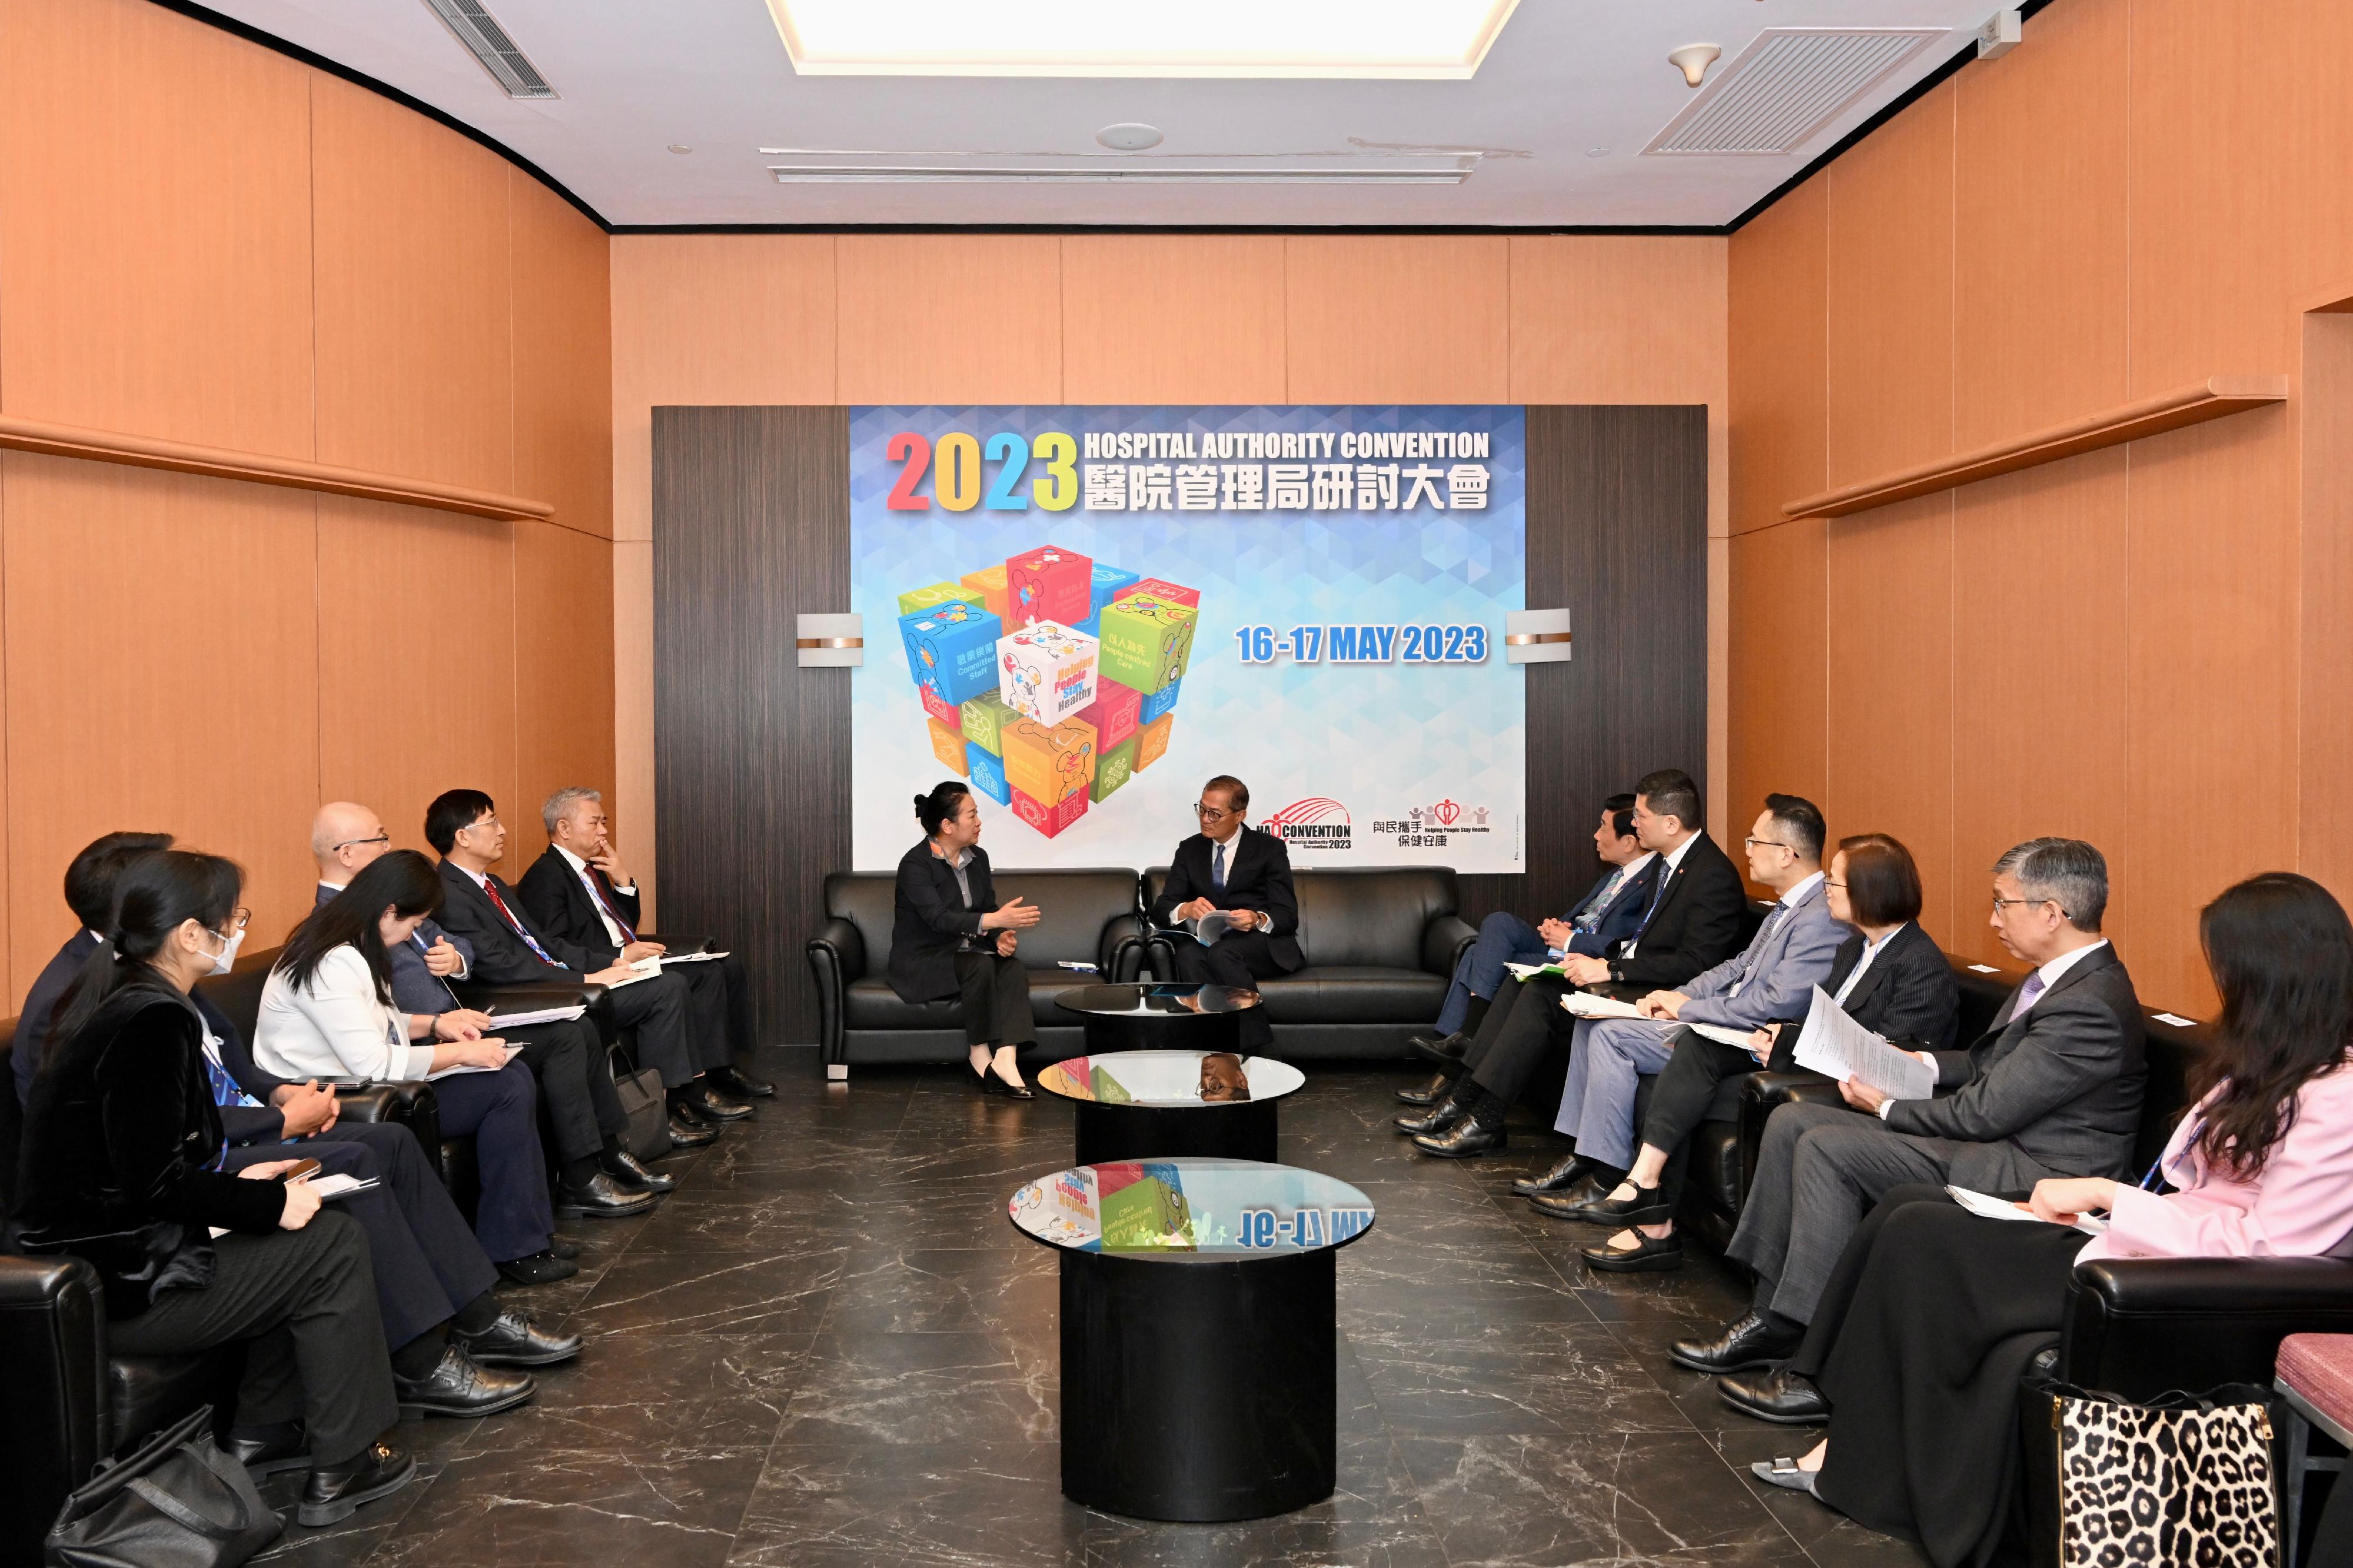 The Secretary for Health, Professor Lo Chung-mau (seventh right), meets the Party Secretary and Director General of the Shenzhen Municipal Health Commission, Ms Wu Hongyan (seventh left), and her delegation at the Hospital Authority Convention 2023 today (May 16) to explore ways in boosting exchanges and co-operation in the area of healthcare between Hong Kong and Shenzhen Municipality.